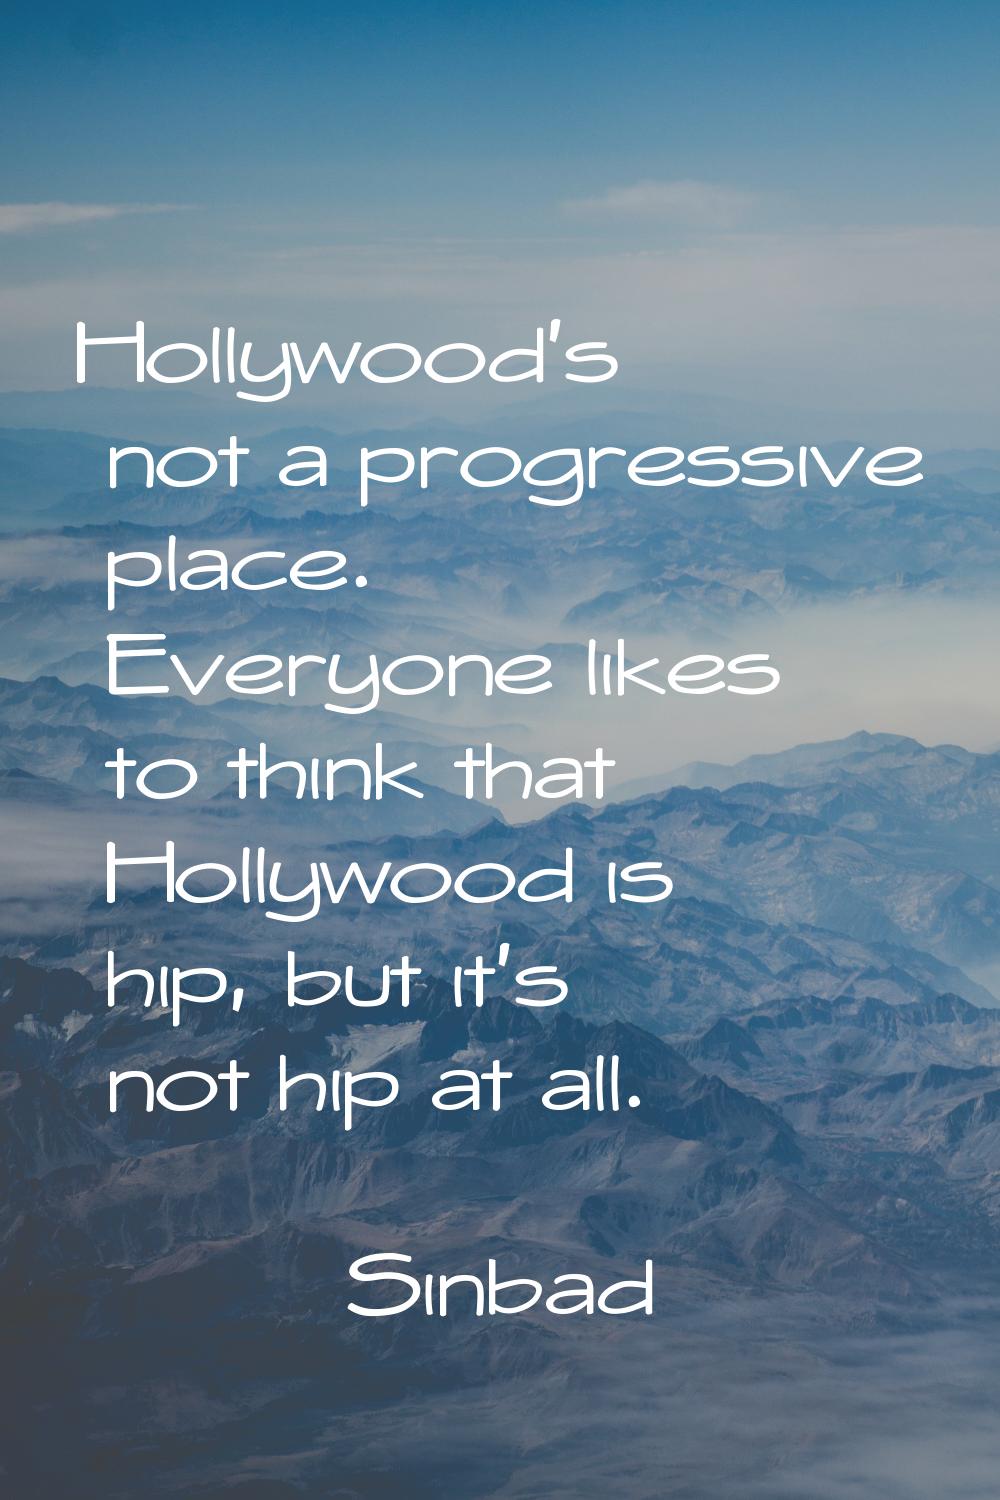 Hollywood's not a progressive place. Everyone likes to think that Hollywood is hip, but it's not hi